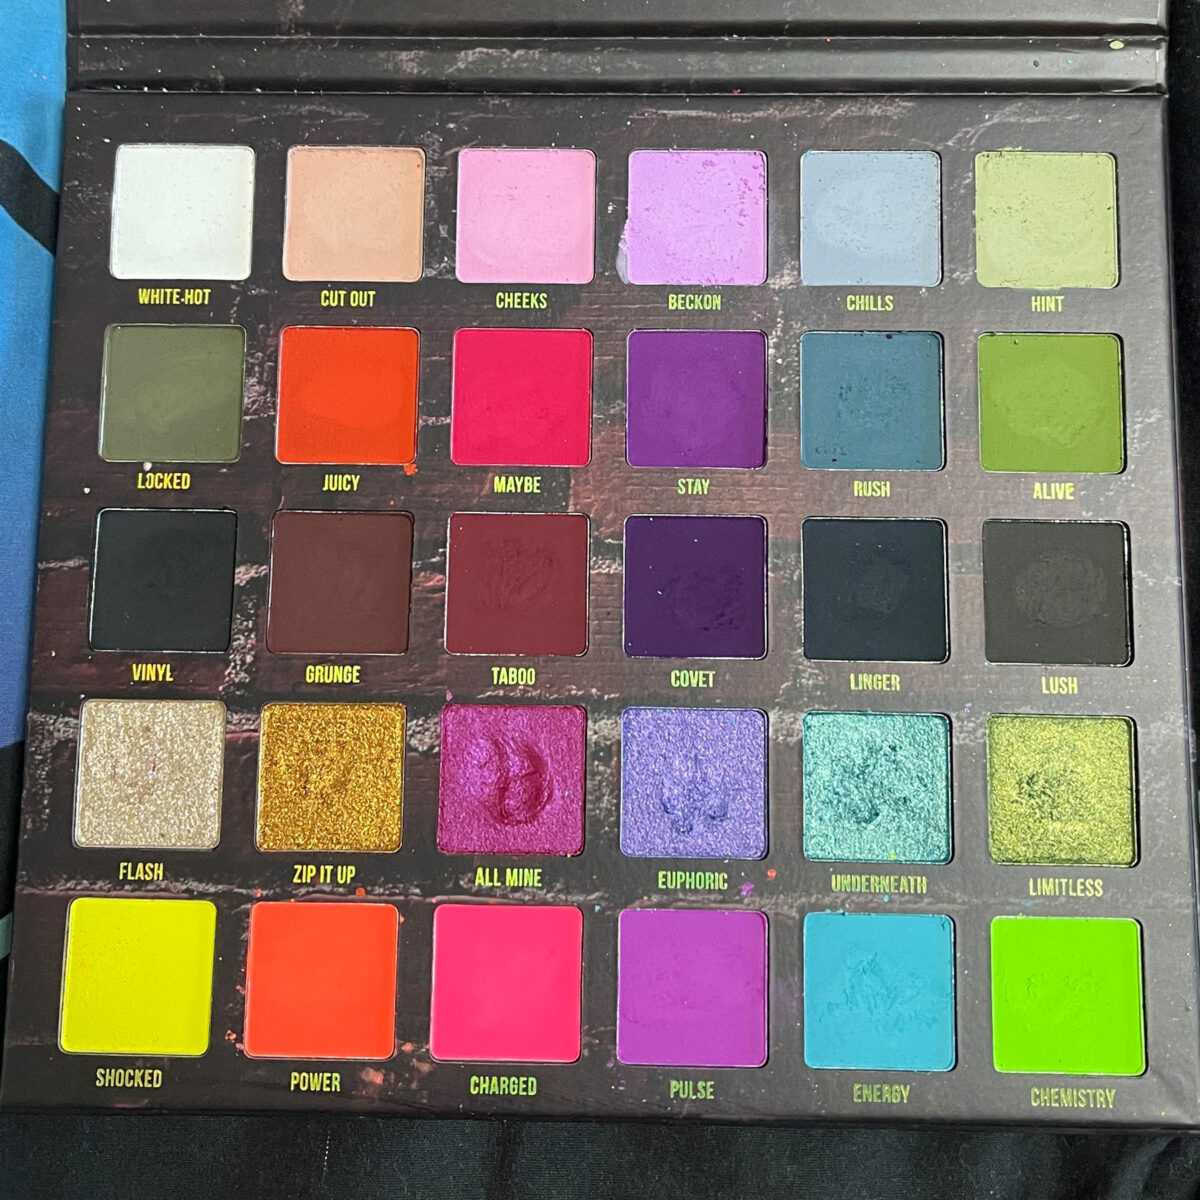 The inside of the Blend Bunny Surge Palette